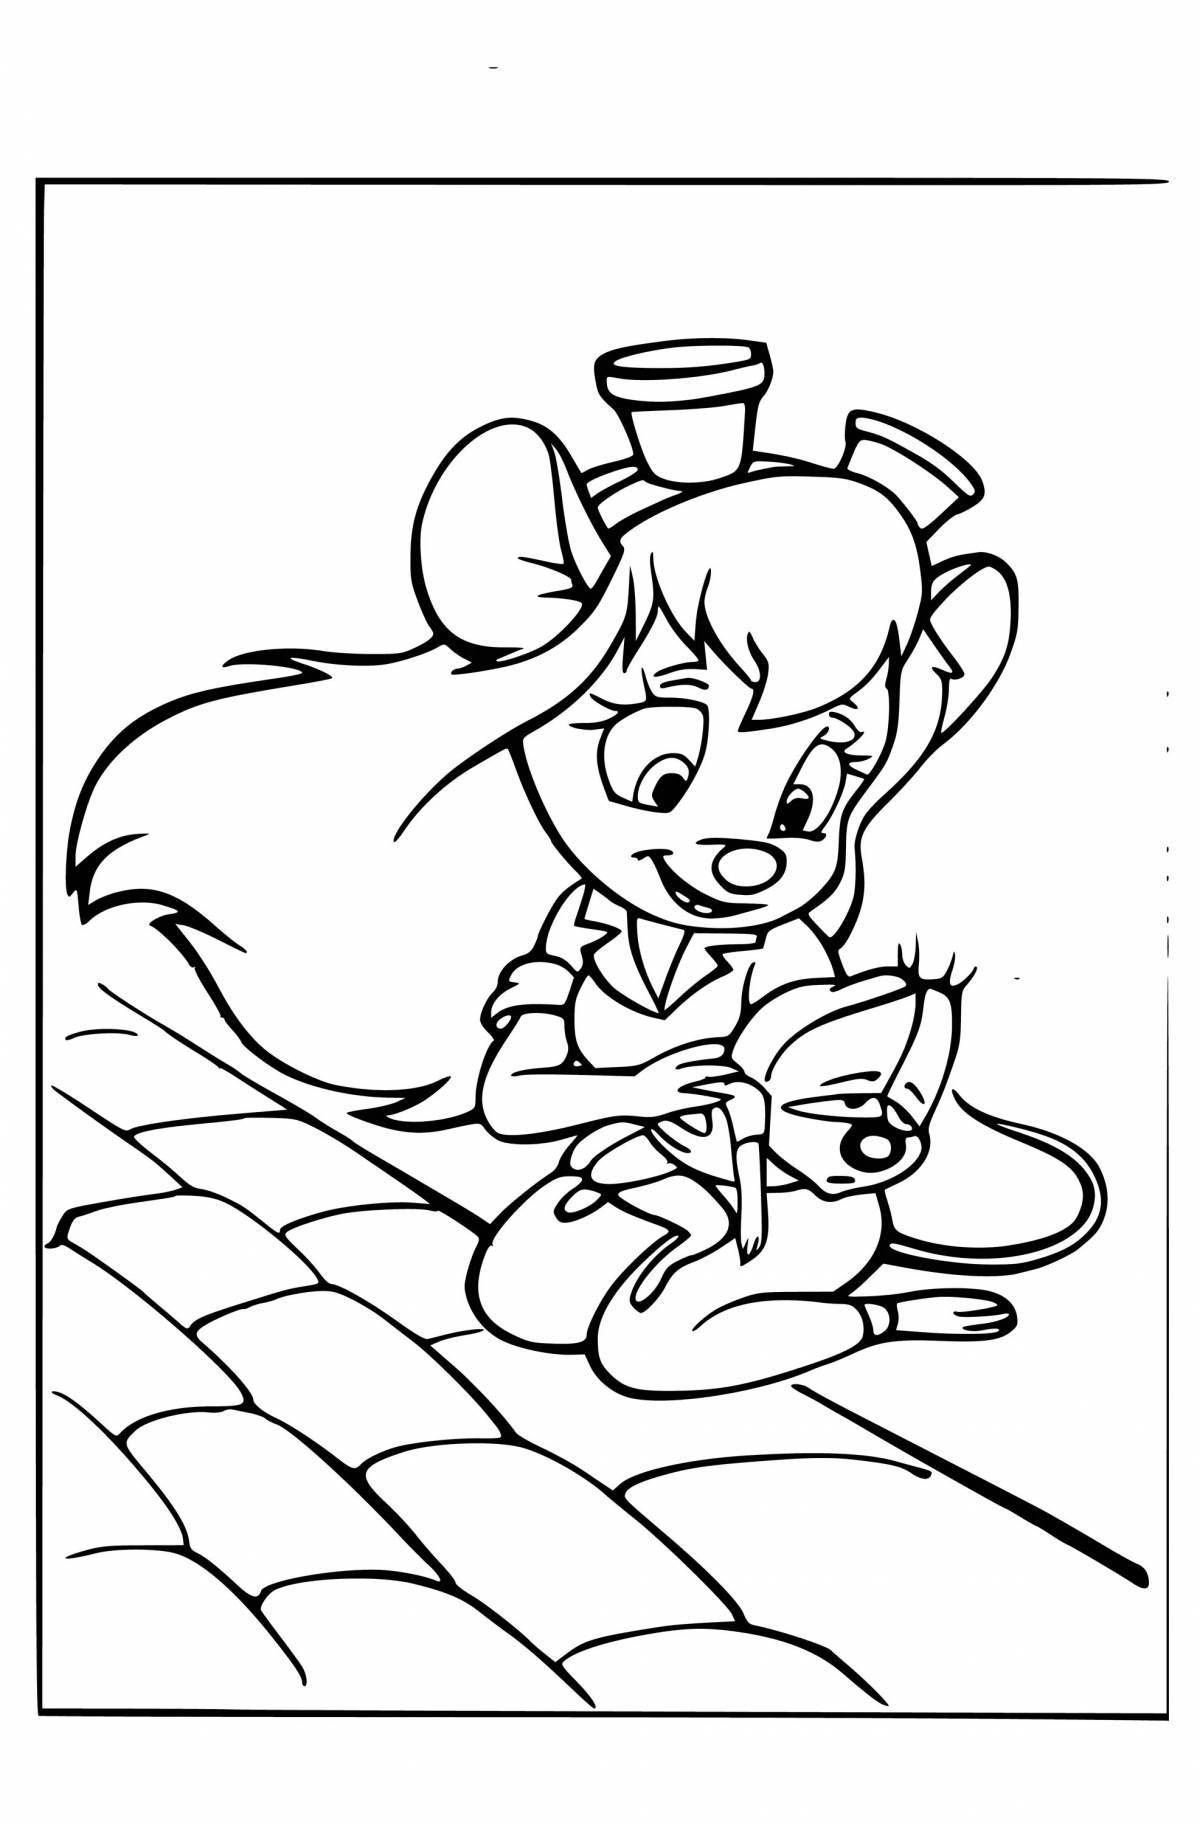 Amazing chip and dale coloring page